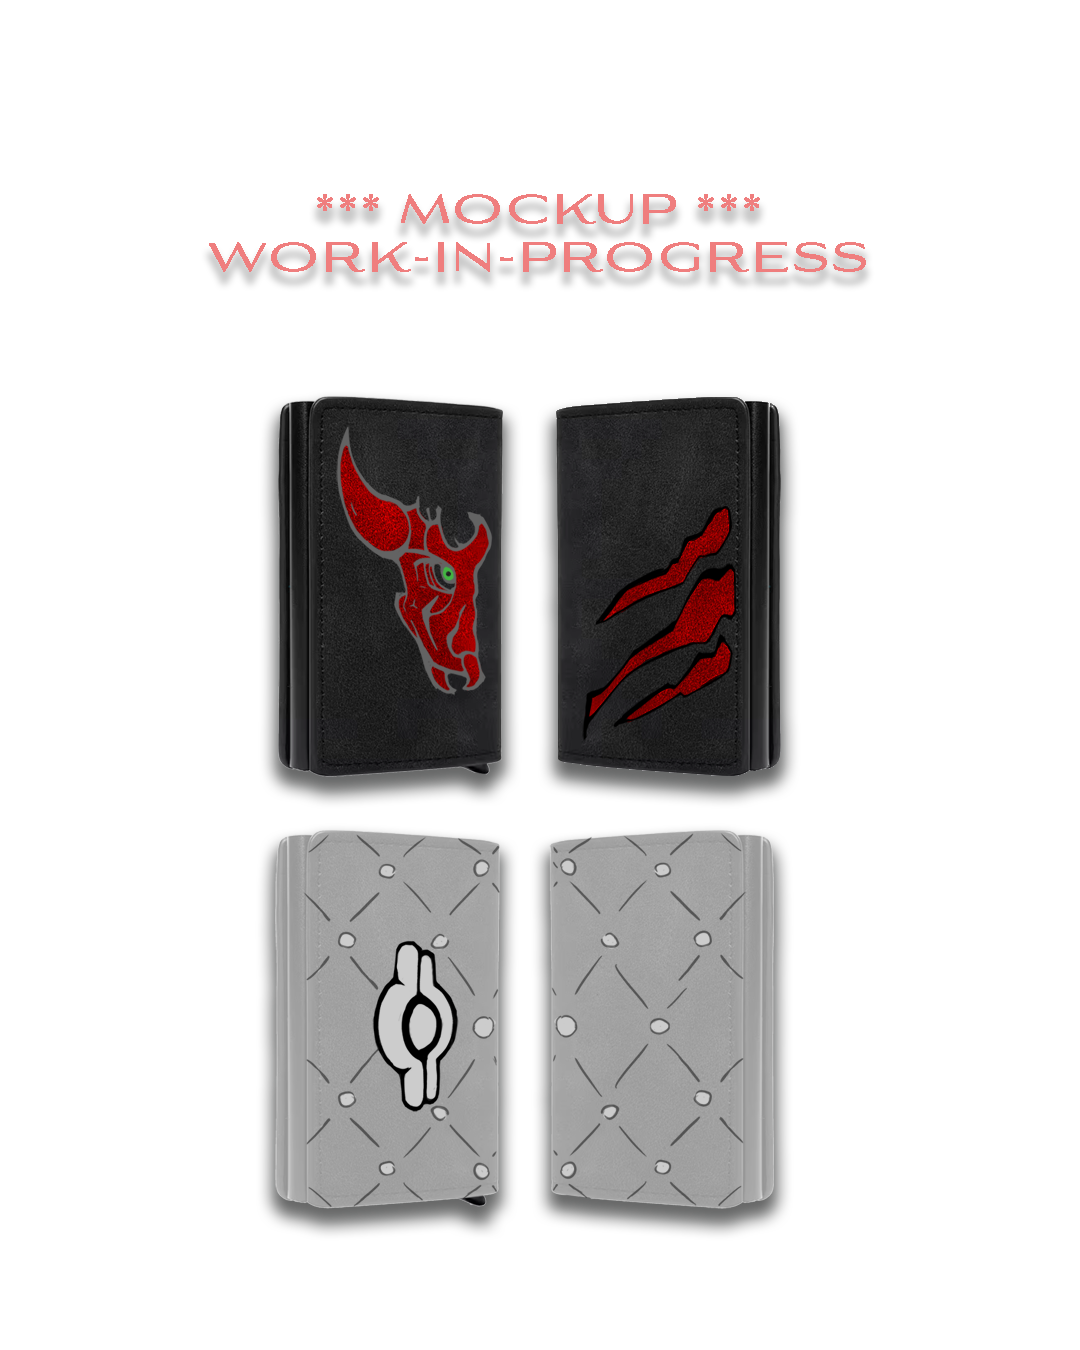 PRESALE LIMITED: Rivalry of Witches Wallet(s)